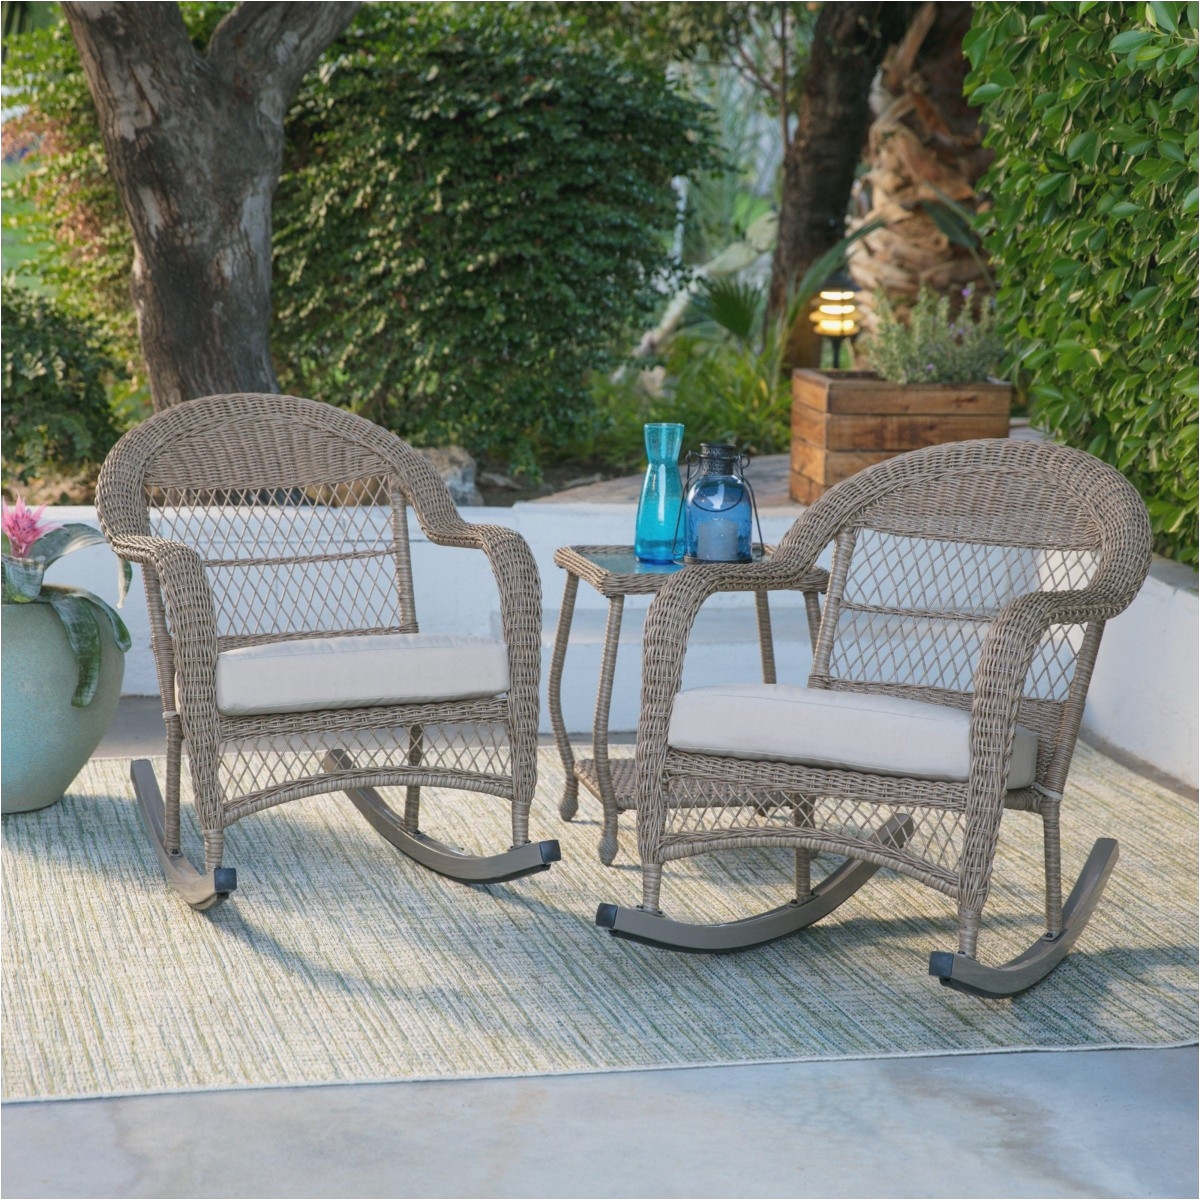 Balcony Height Swivel Patio Chairs Balcony Height Patio Chairs In 2019 Metal Outdoor Table and Chairs